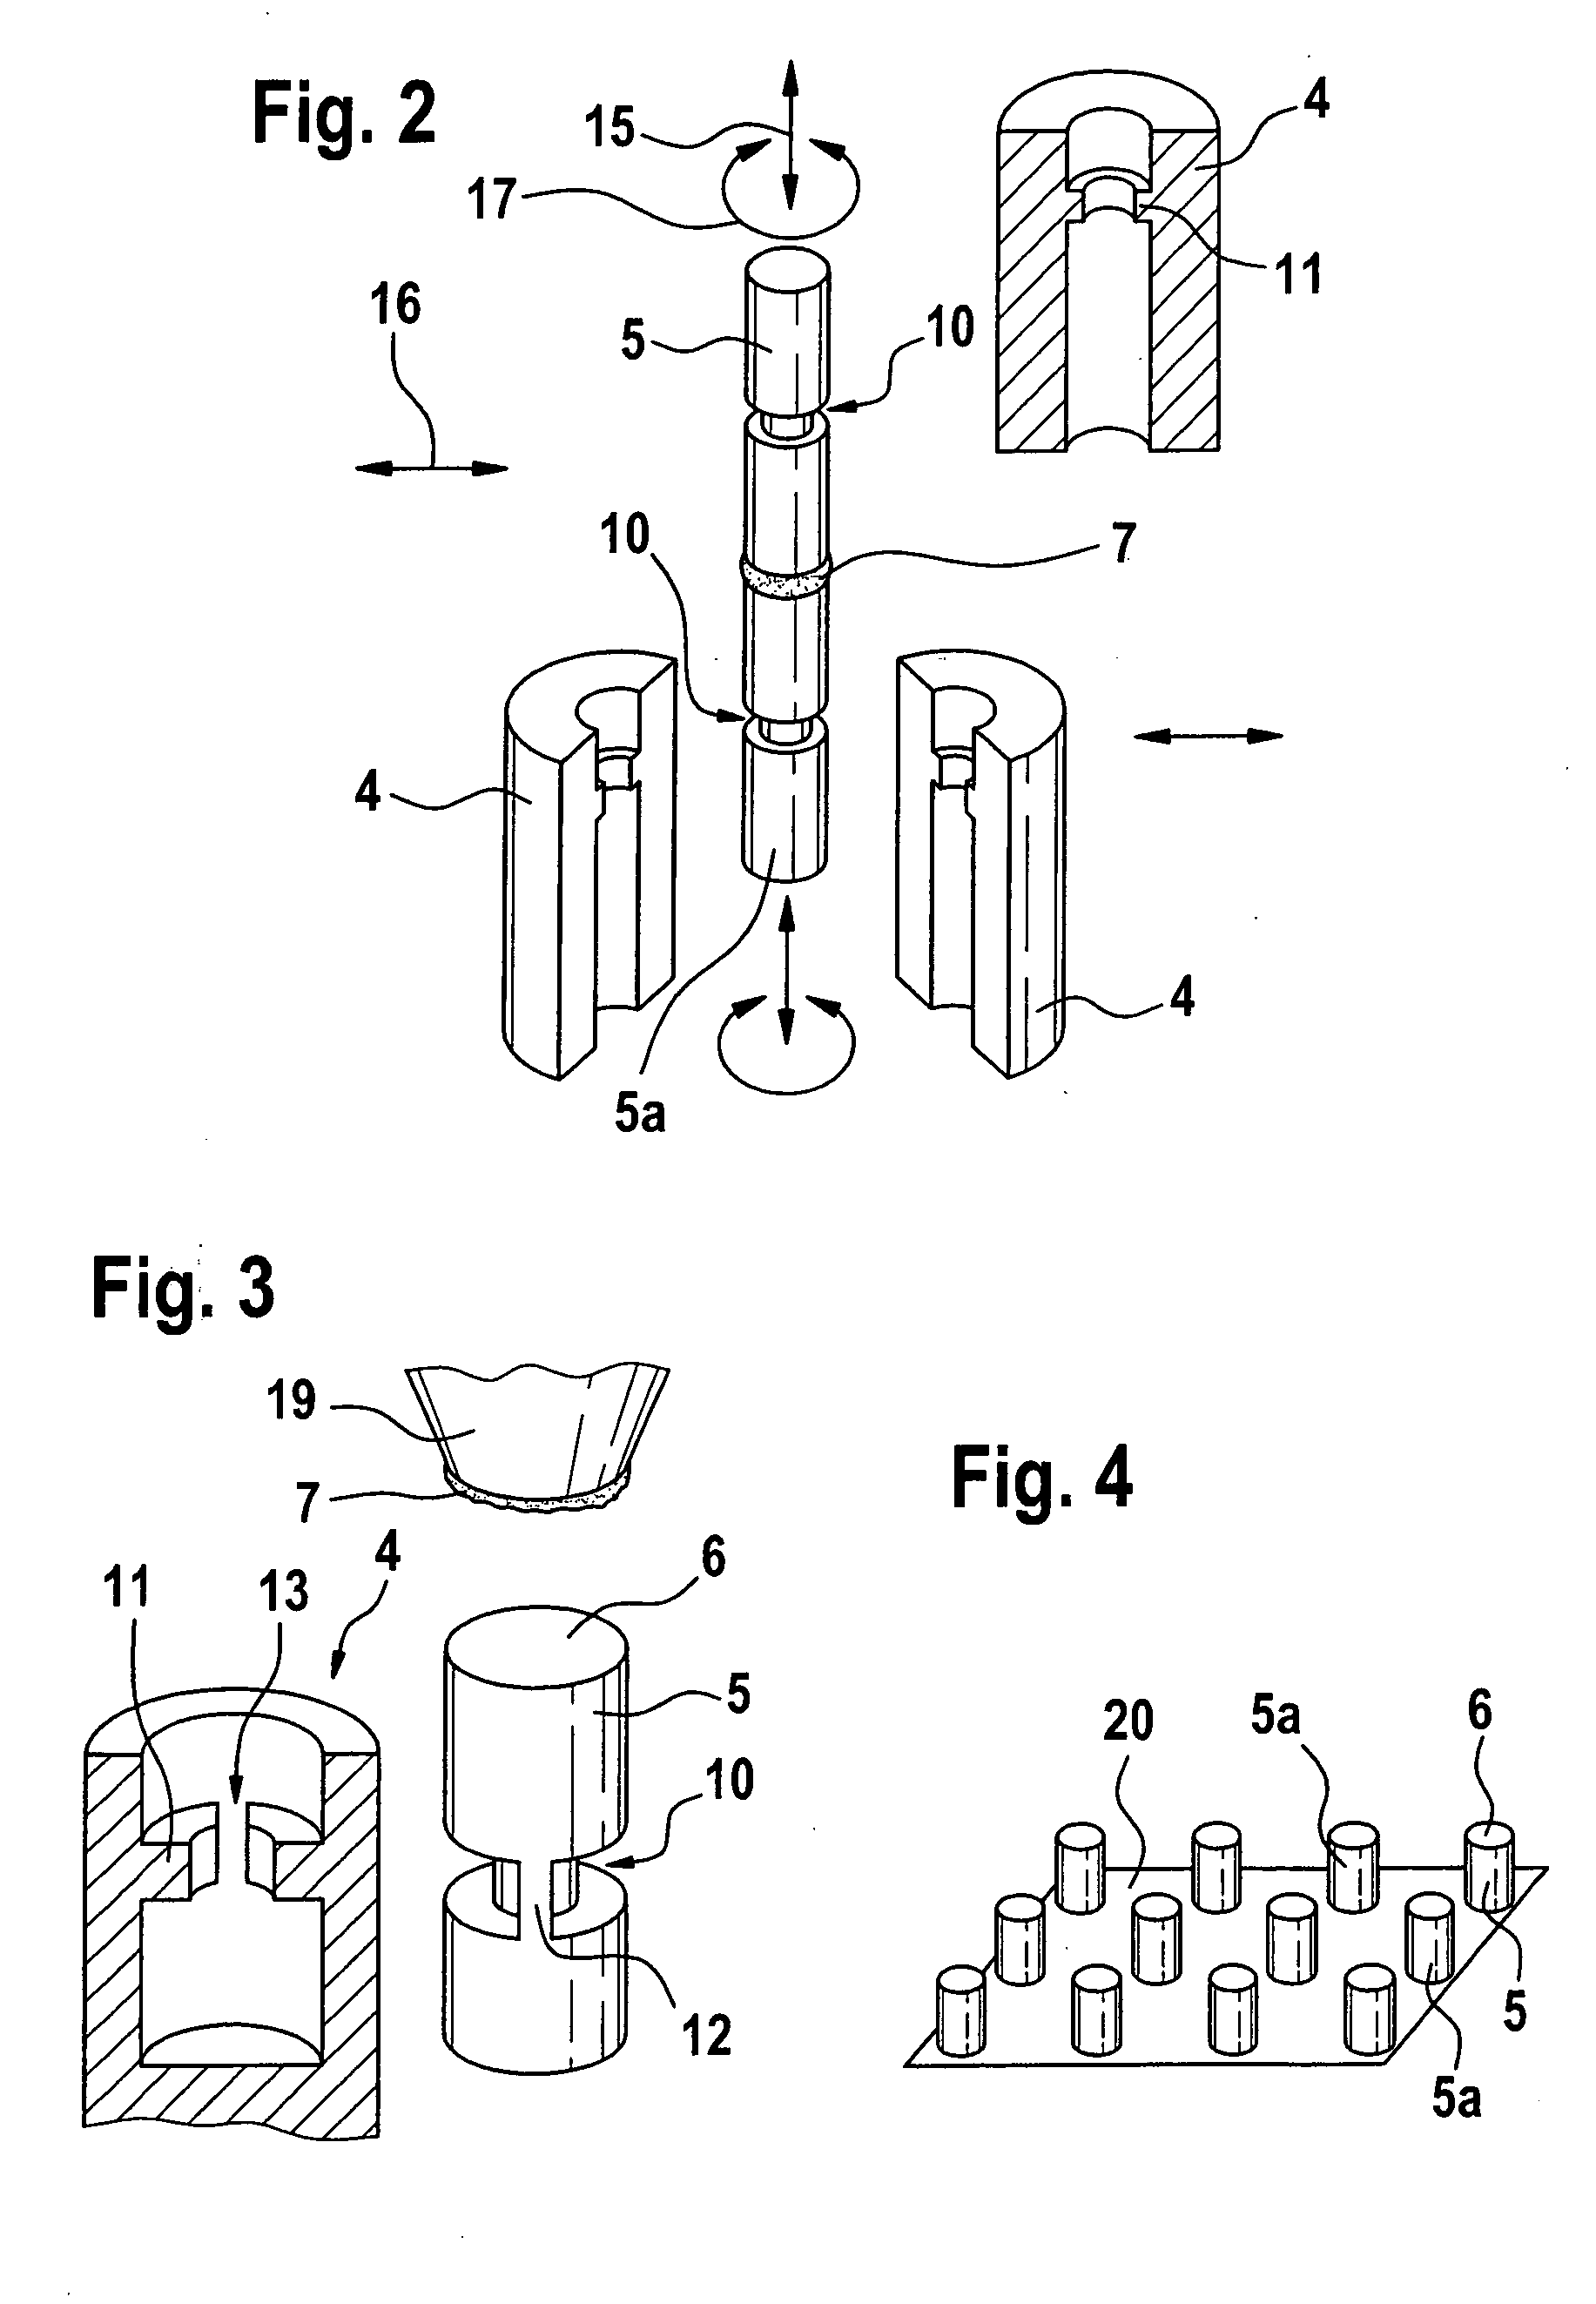 Device for testing material properties with regard to combined tensile and shear loads, in particular for testing adhesives